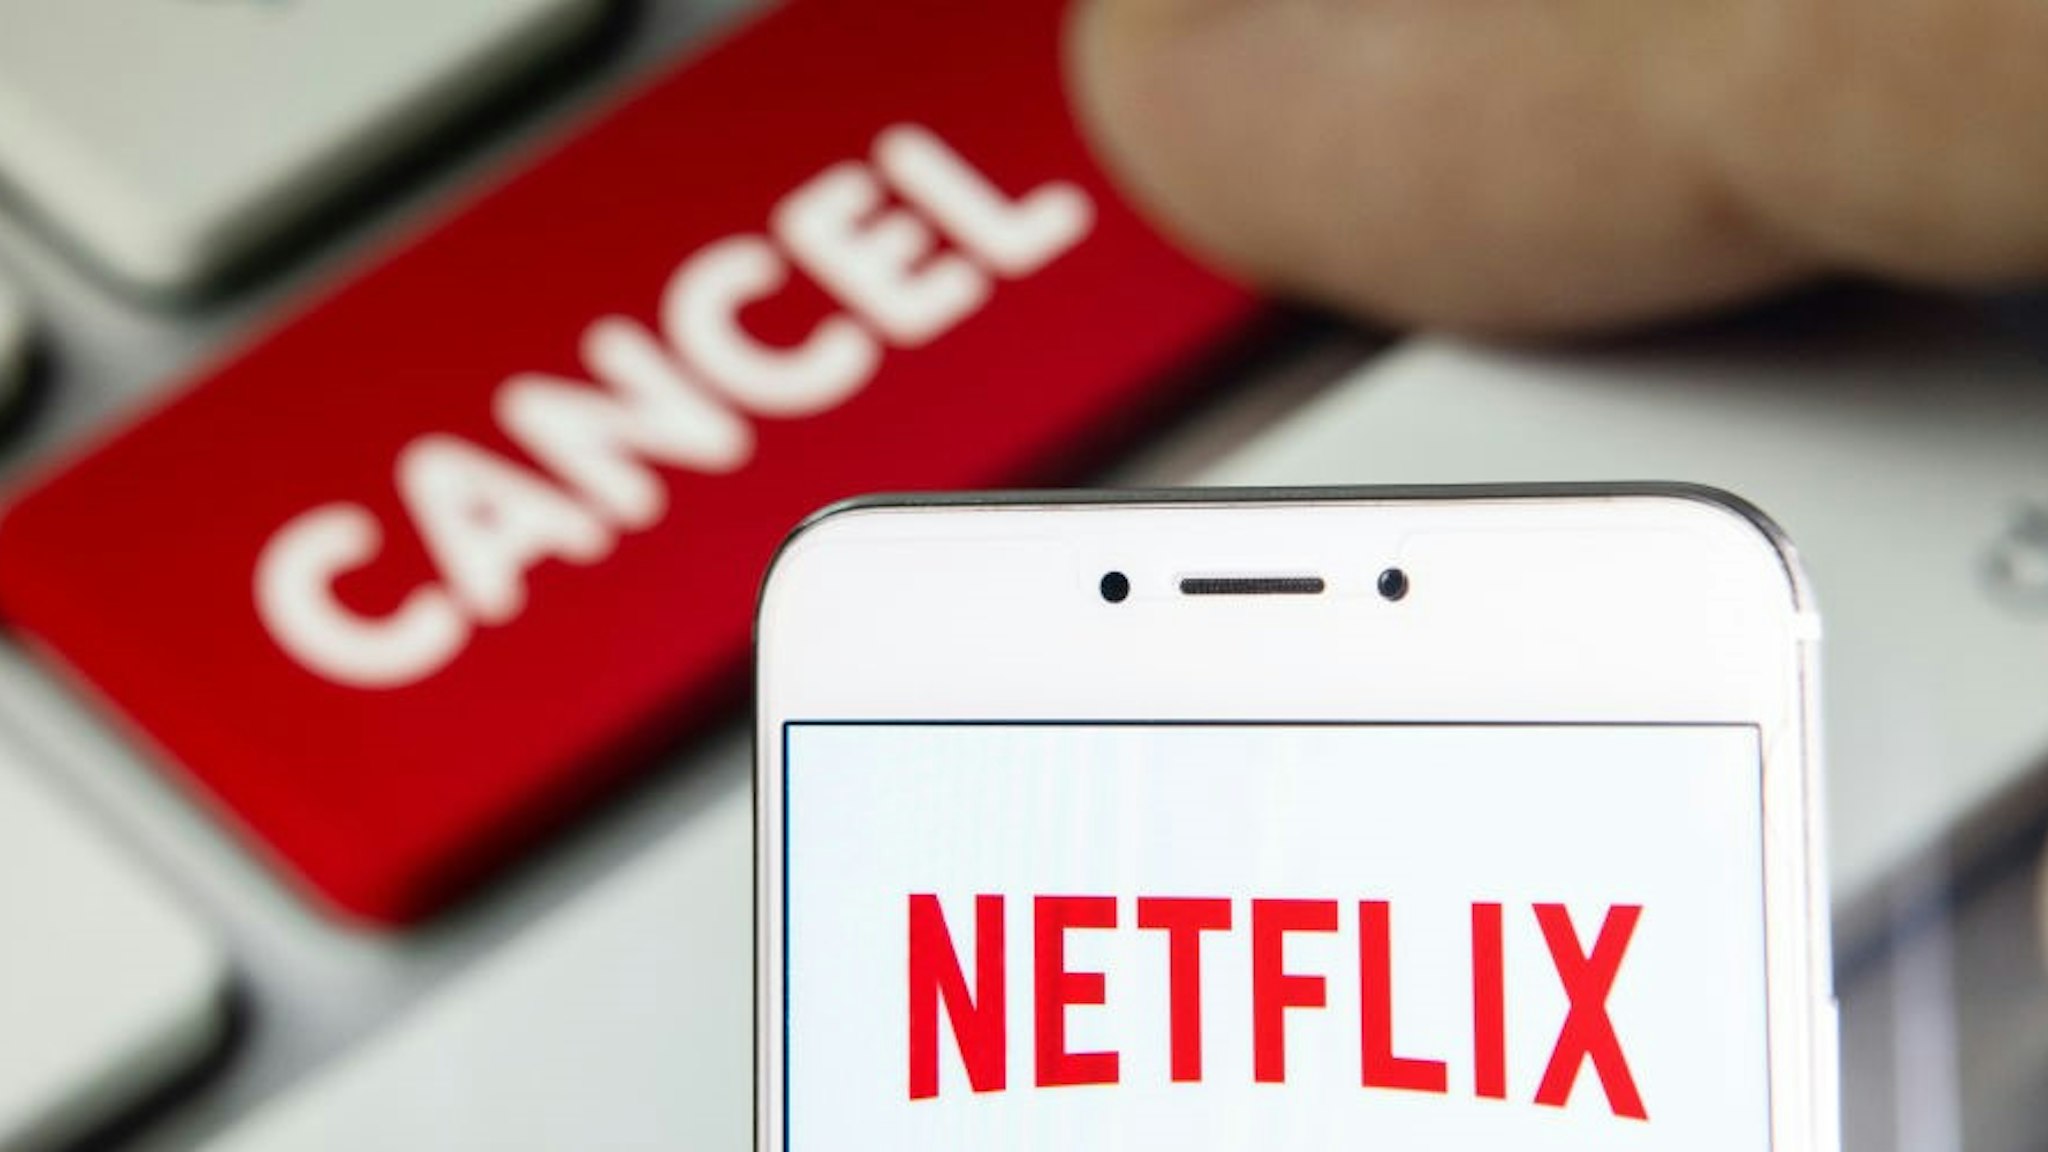 In this photo illustration a American global on-demand Internet streaming media provider Netflix logo is seen on an Android mobile device with a computer key which says cancel.